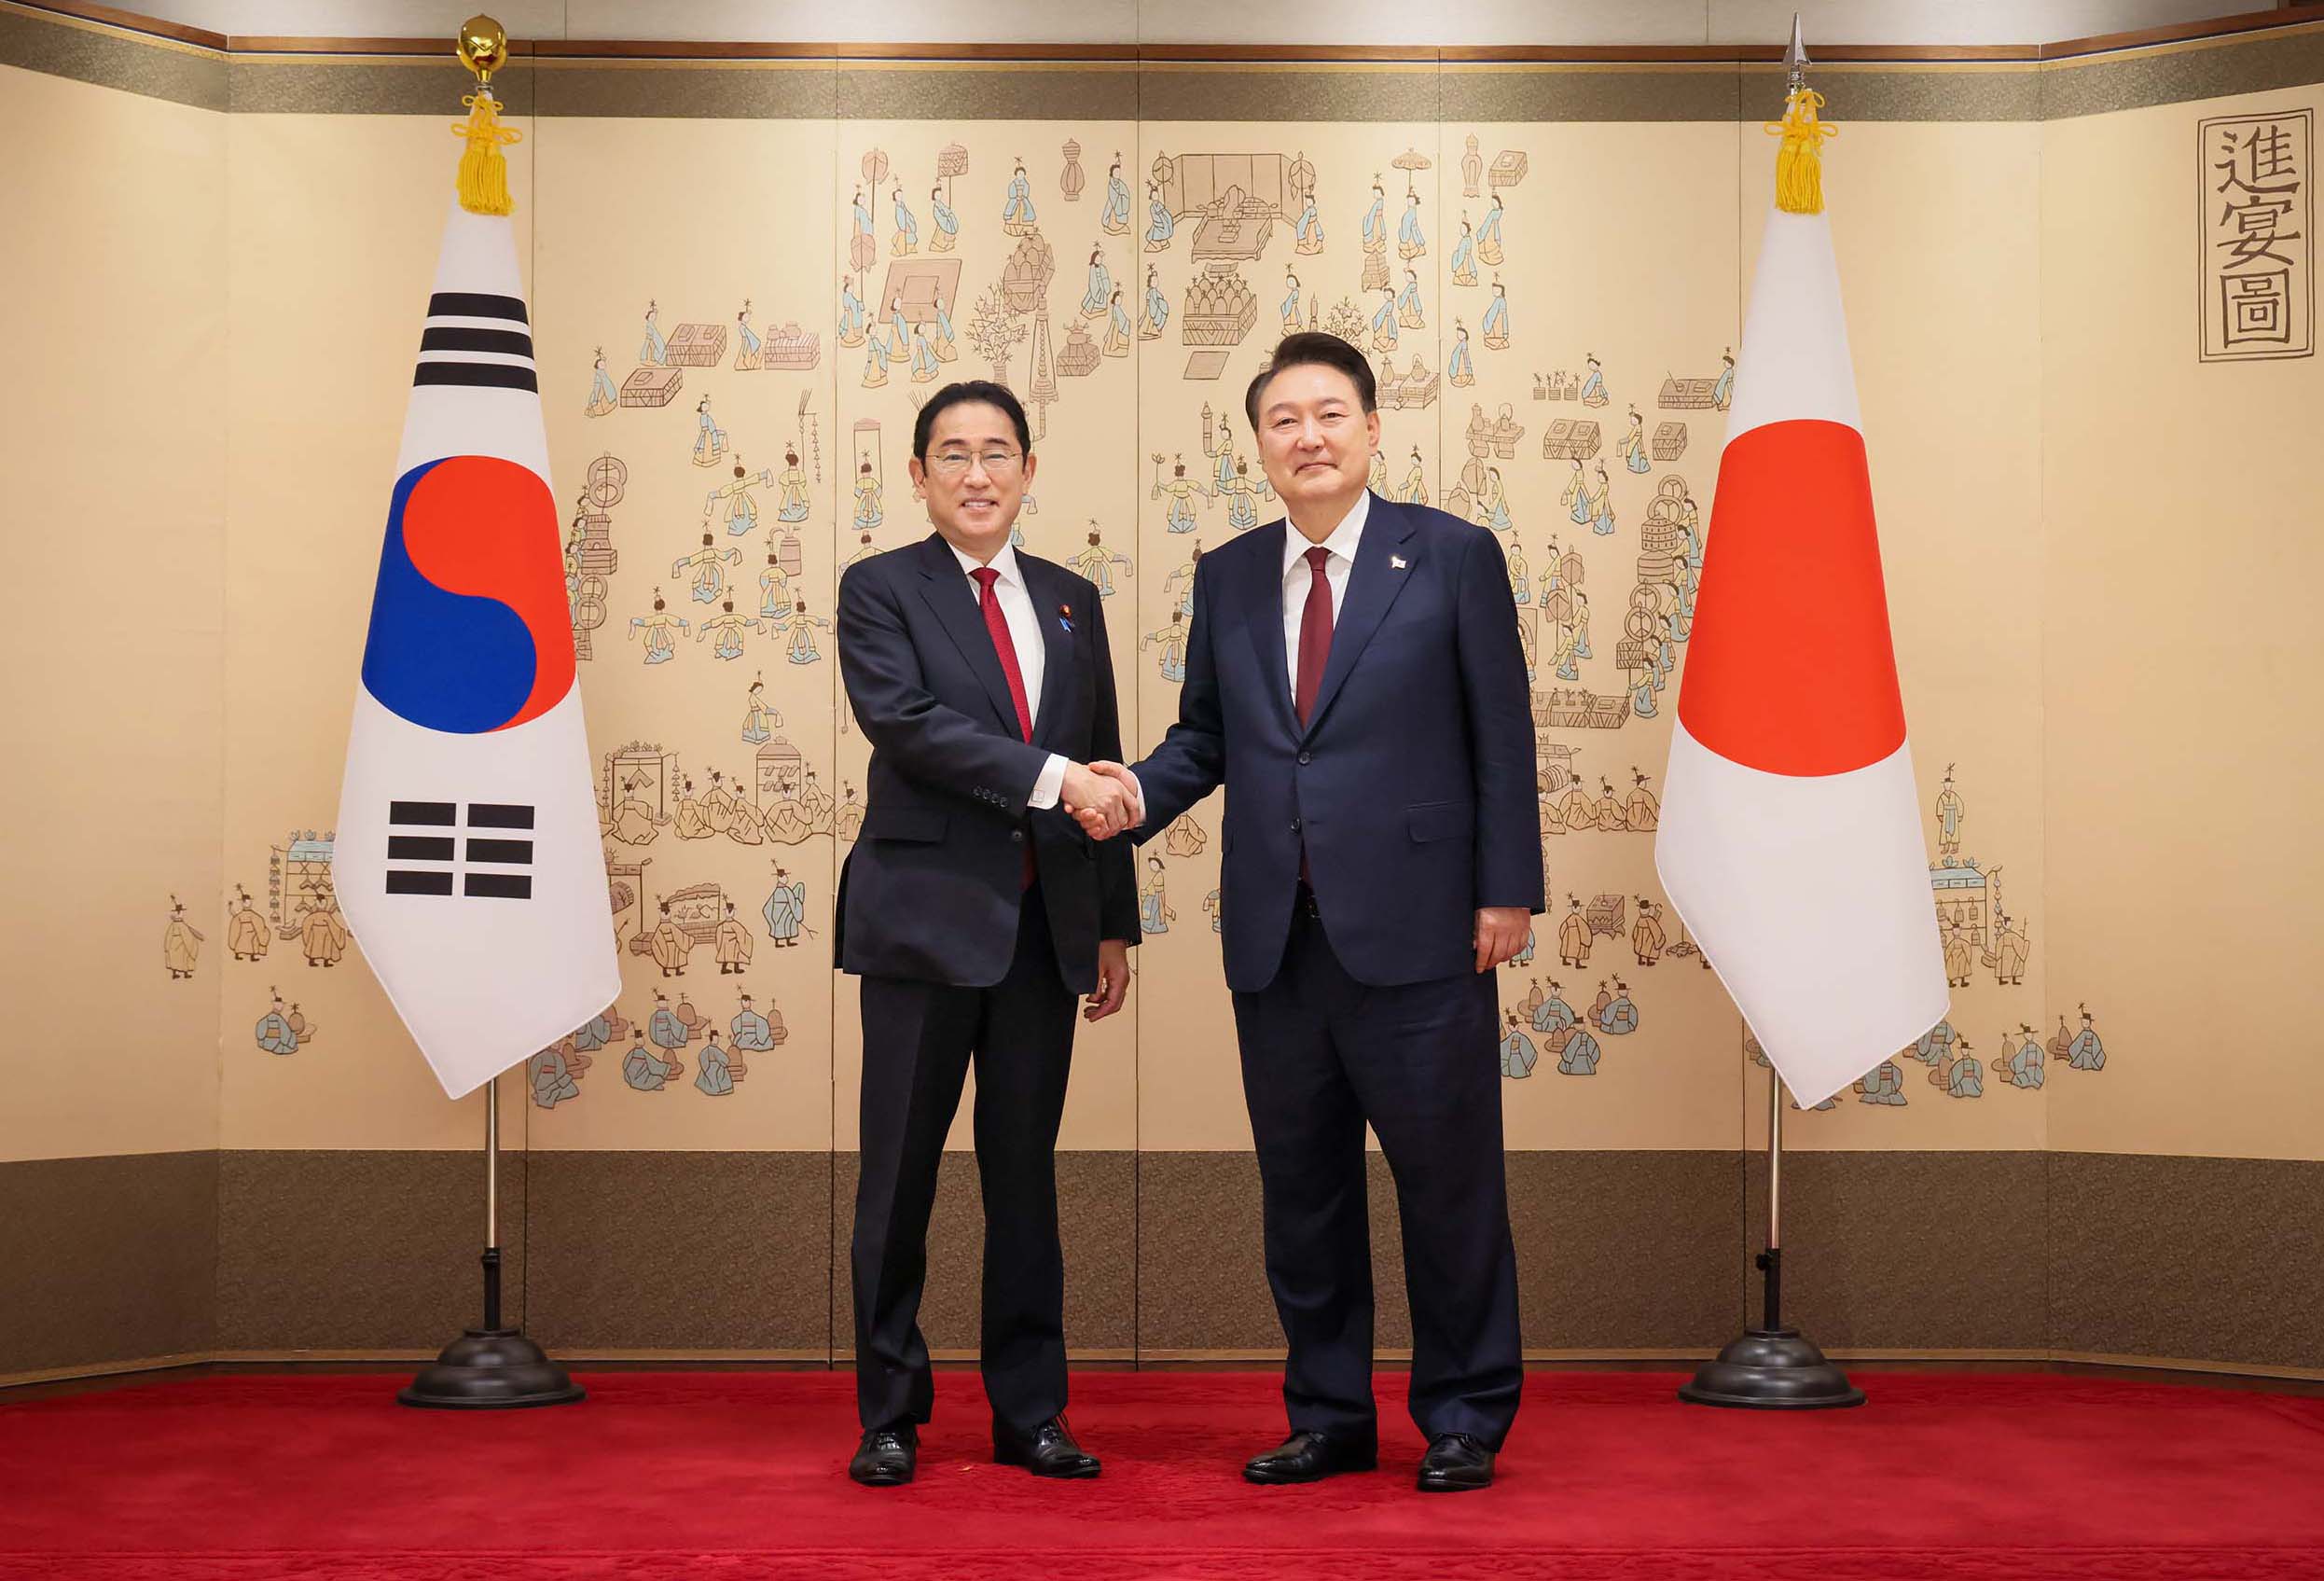 Prime Minister Kishida's Attendance at the Japan-China-ROK Trilateral Summit Meeting and Other Events: First Day